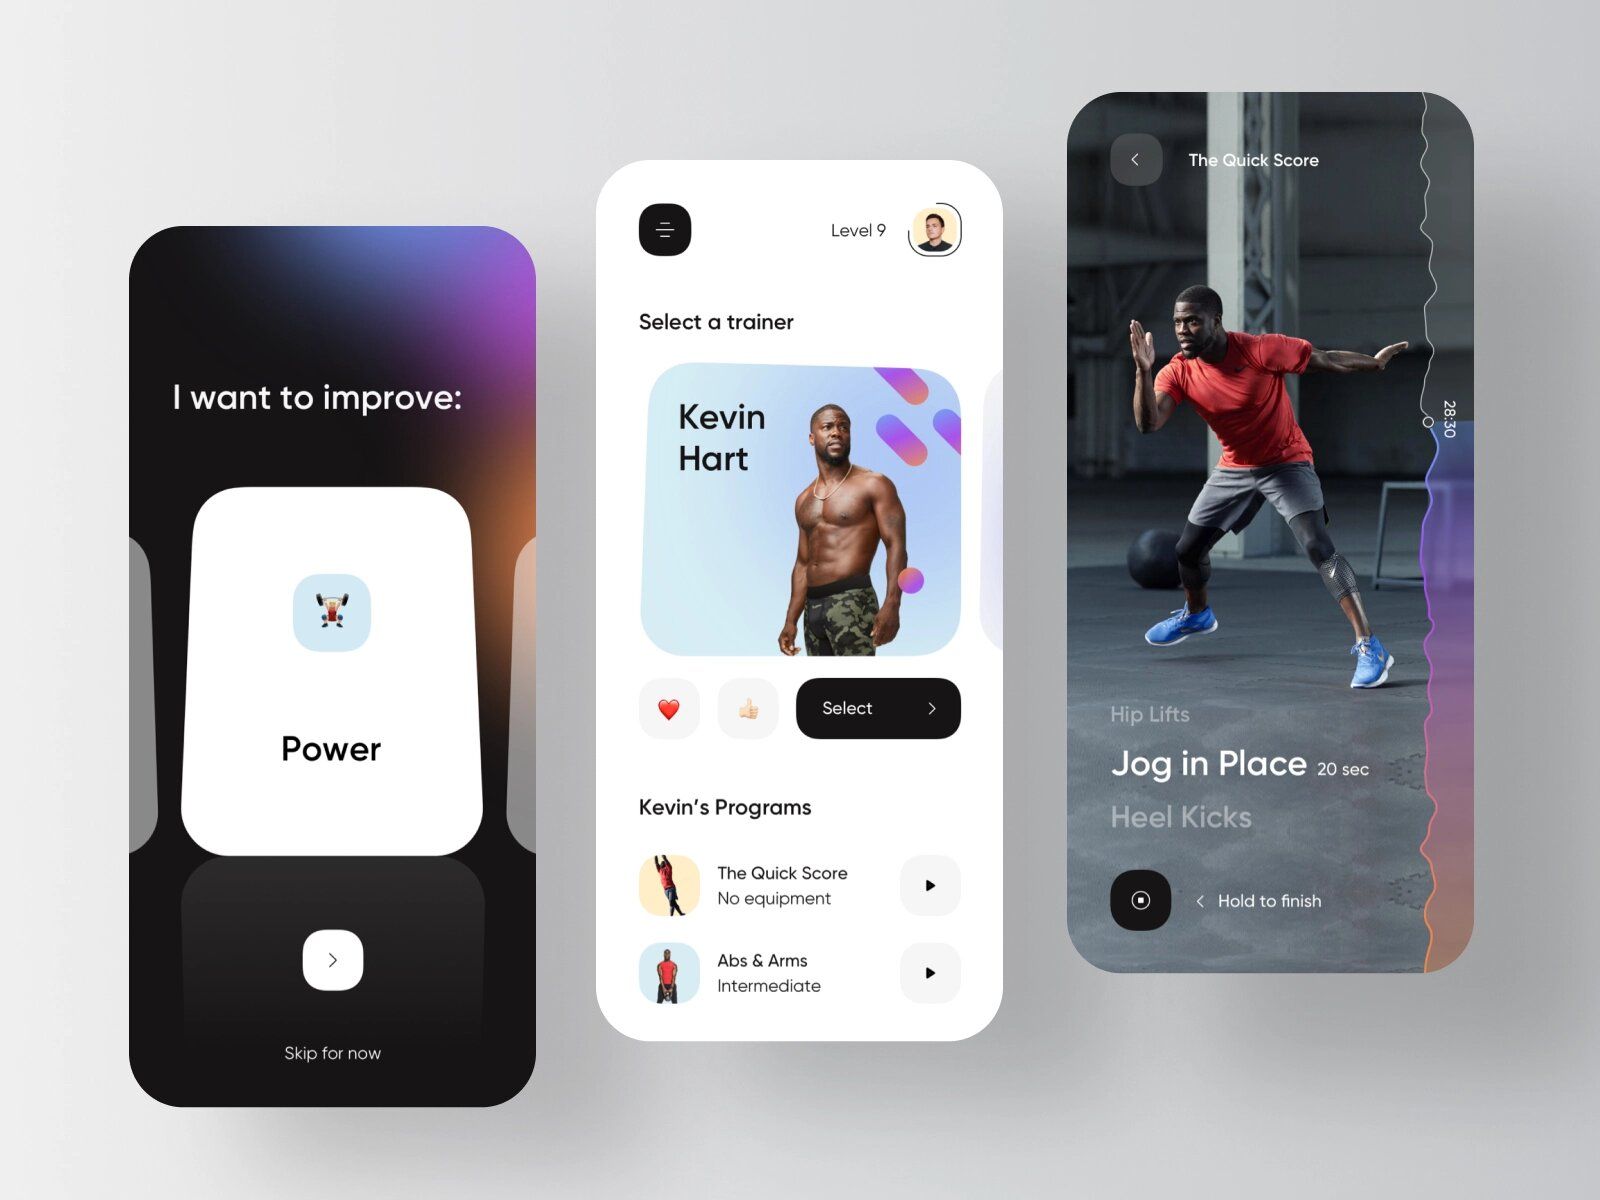 In case you doubt whether IoT technology will improve your business, it will definitely can help you provide high-quality services and increase revenue in the long run (*image by [RD UX/UI](https://dribbble.com/rondesignlabuxui){ rel="nofollow" target="_blank" .default-md}*)